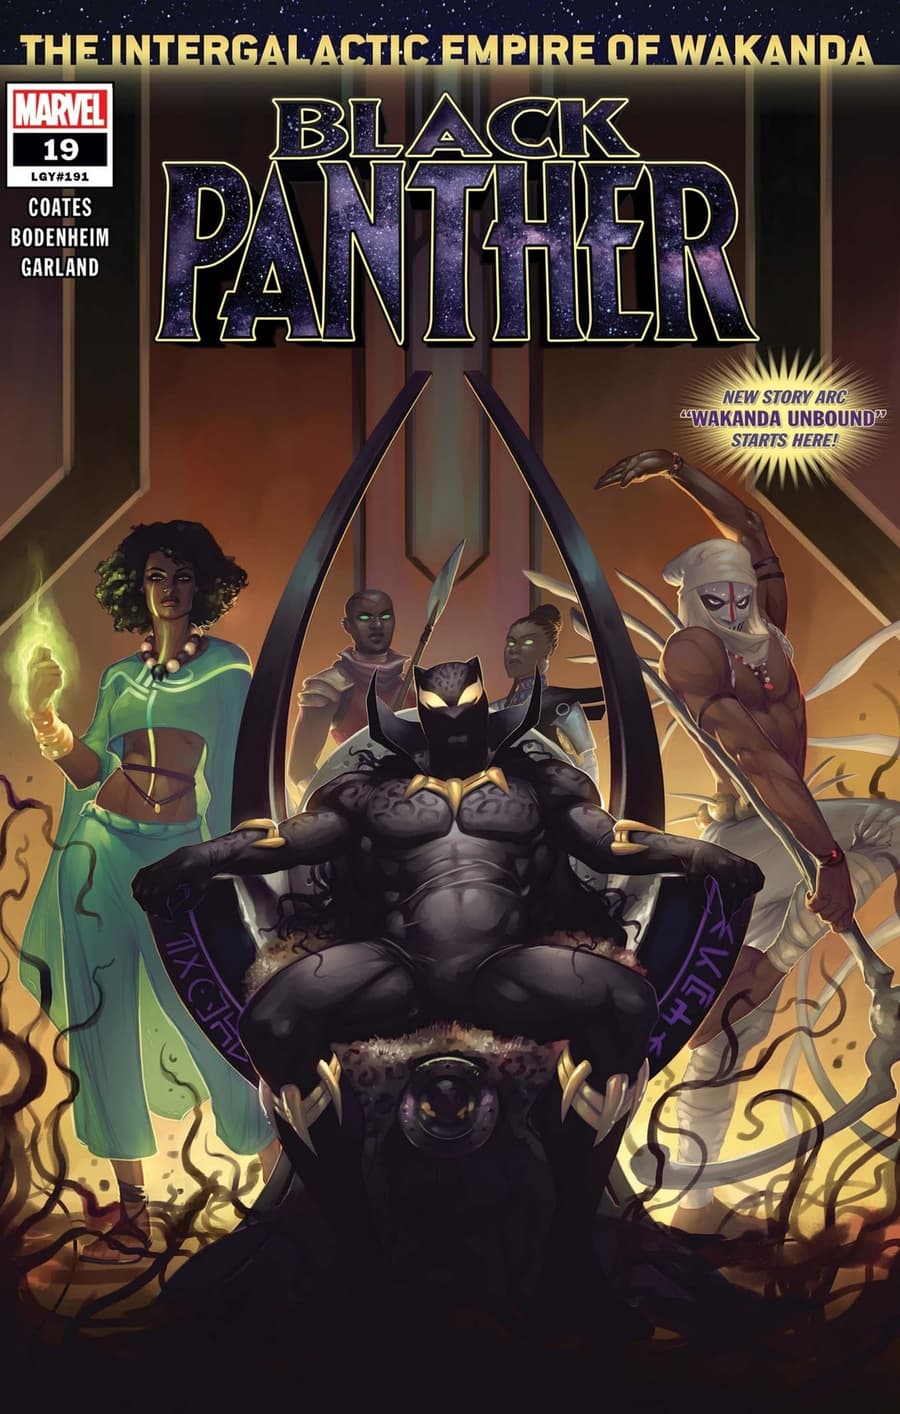 BLACK PANTHER (2018) #19 cover by Meghan Hetrick